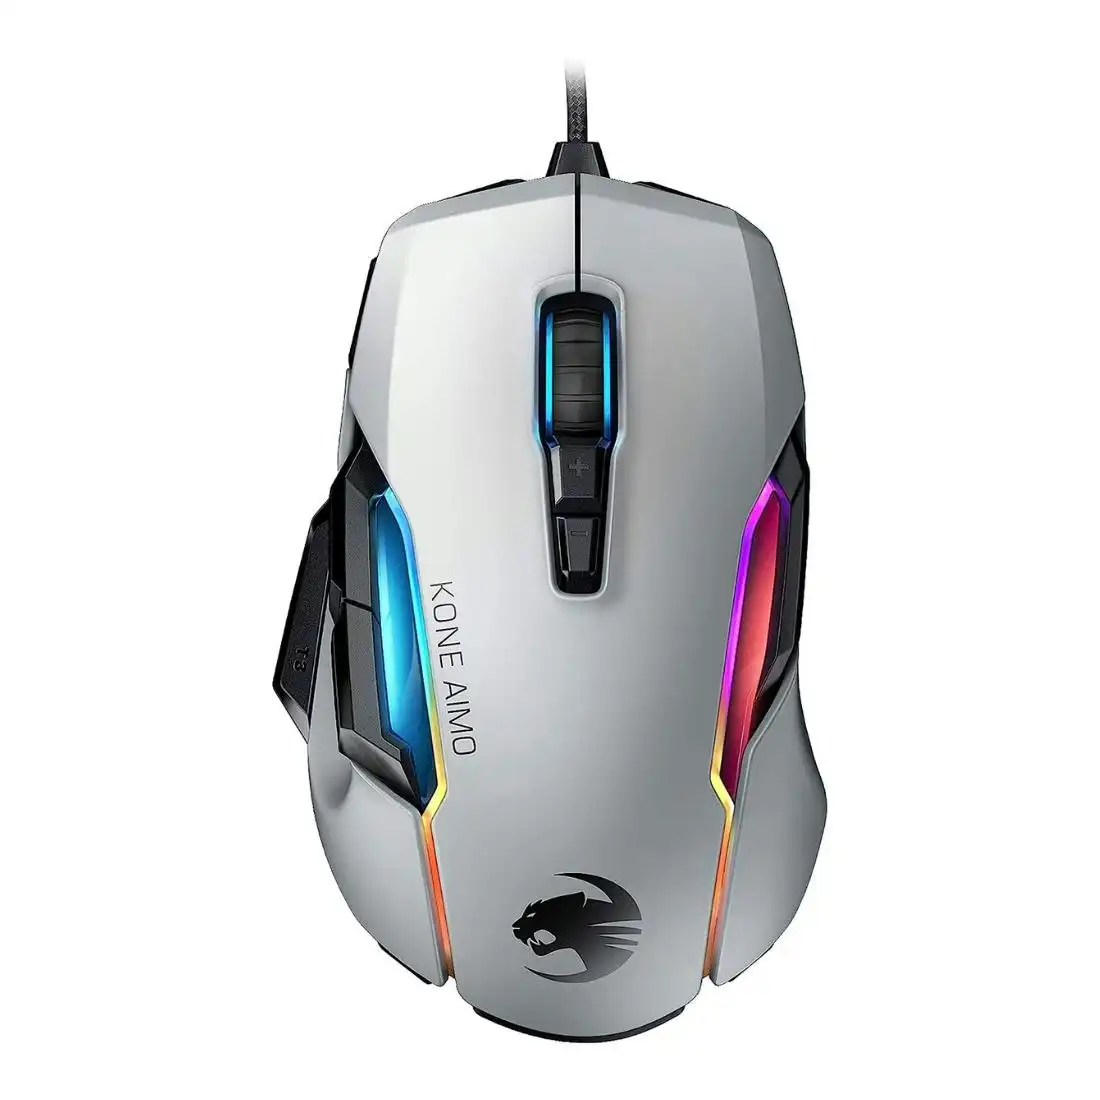 Roccat Kone AIMO RGB Gaming Mouse - White